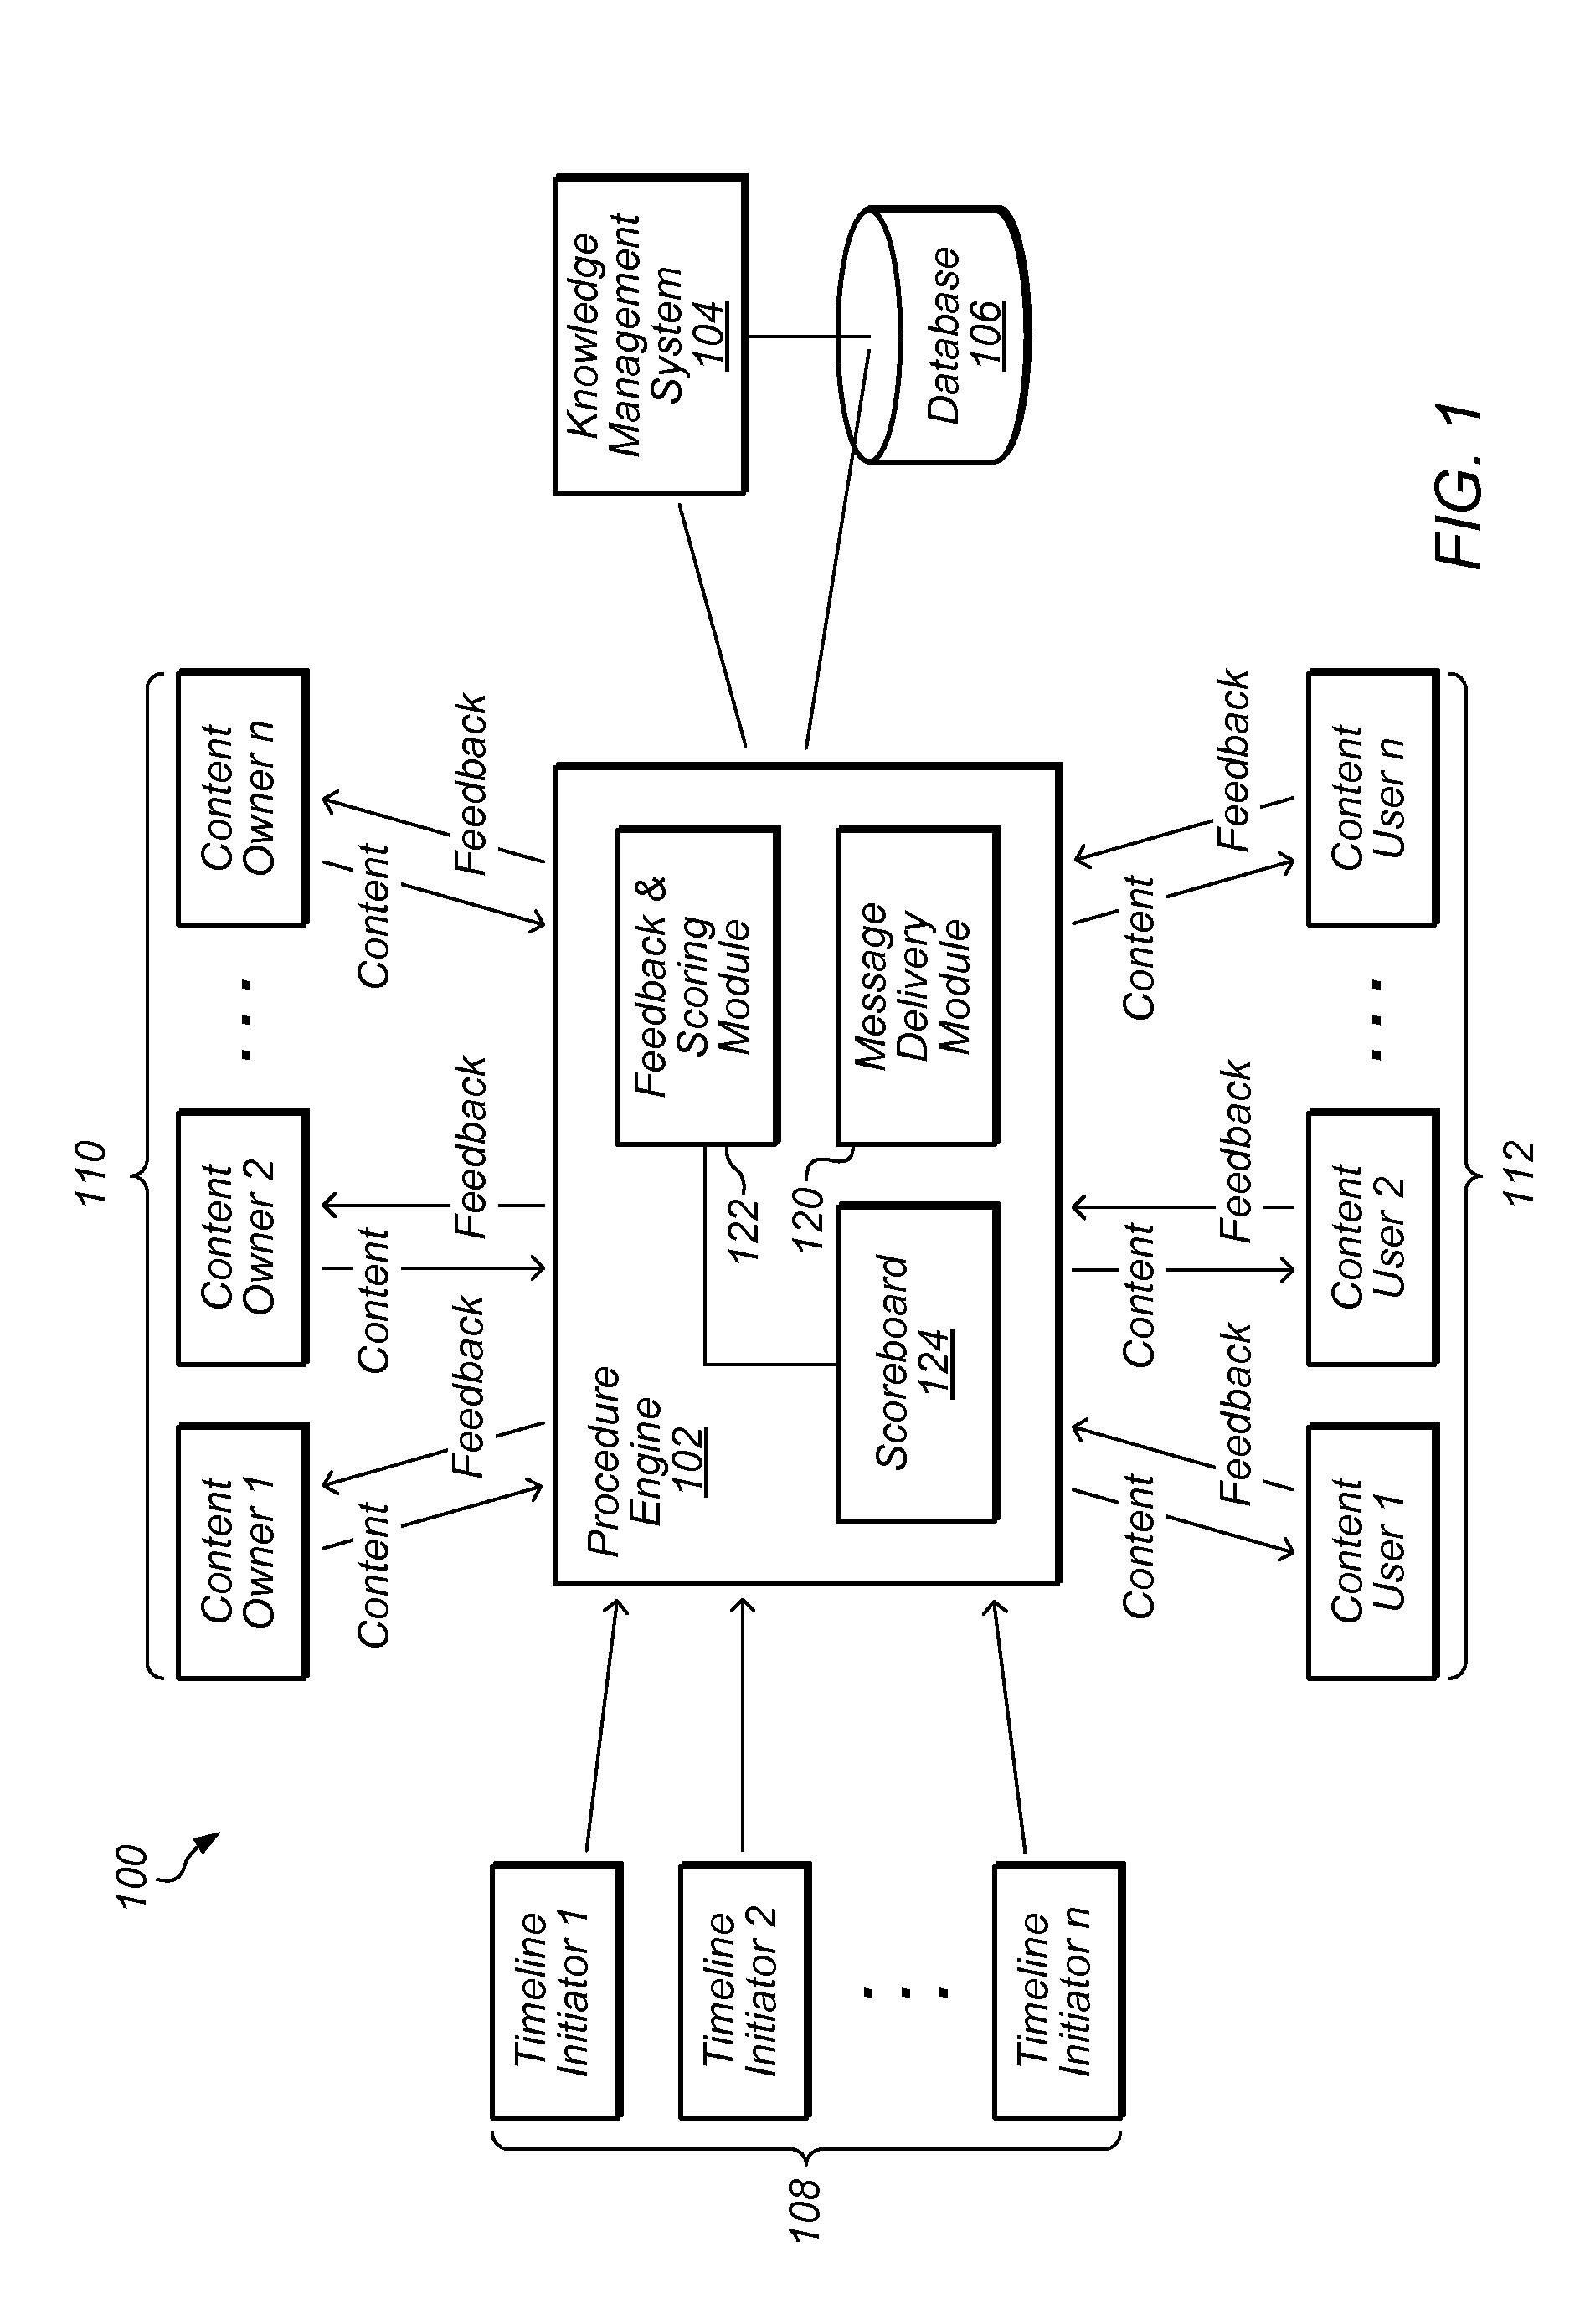 System and method for managing and implementing procedures and practices